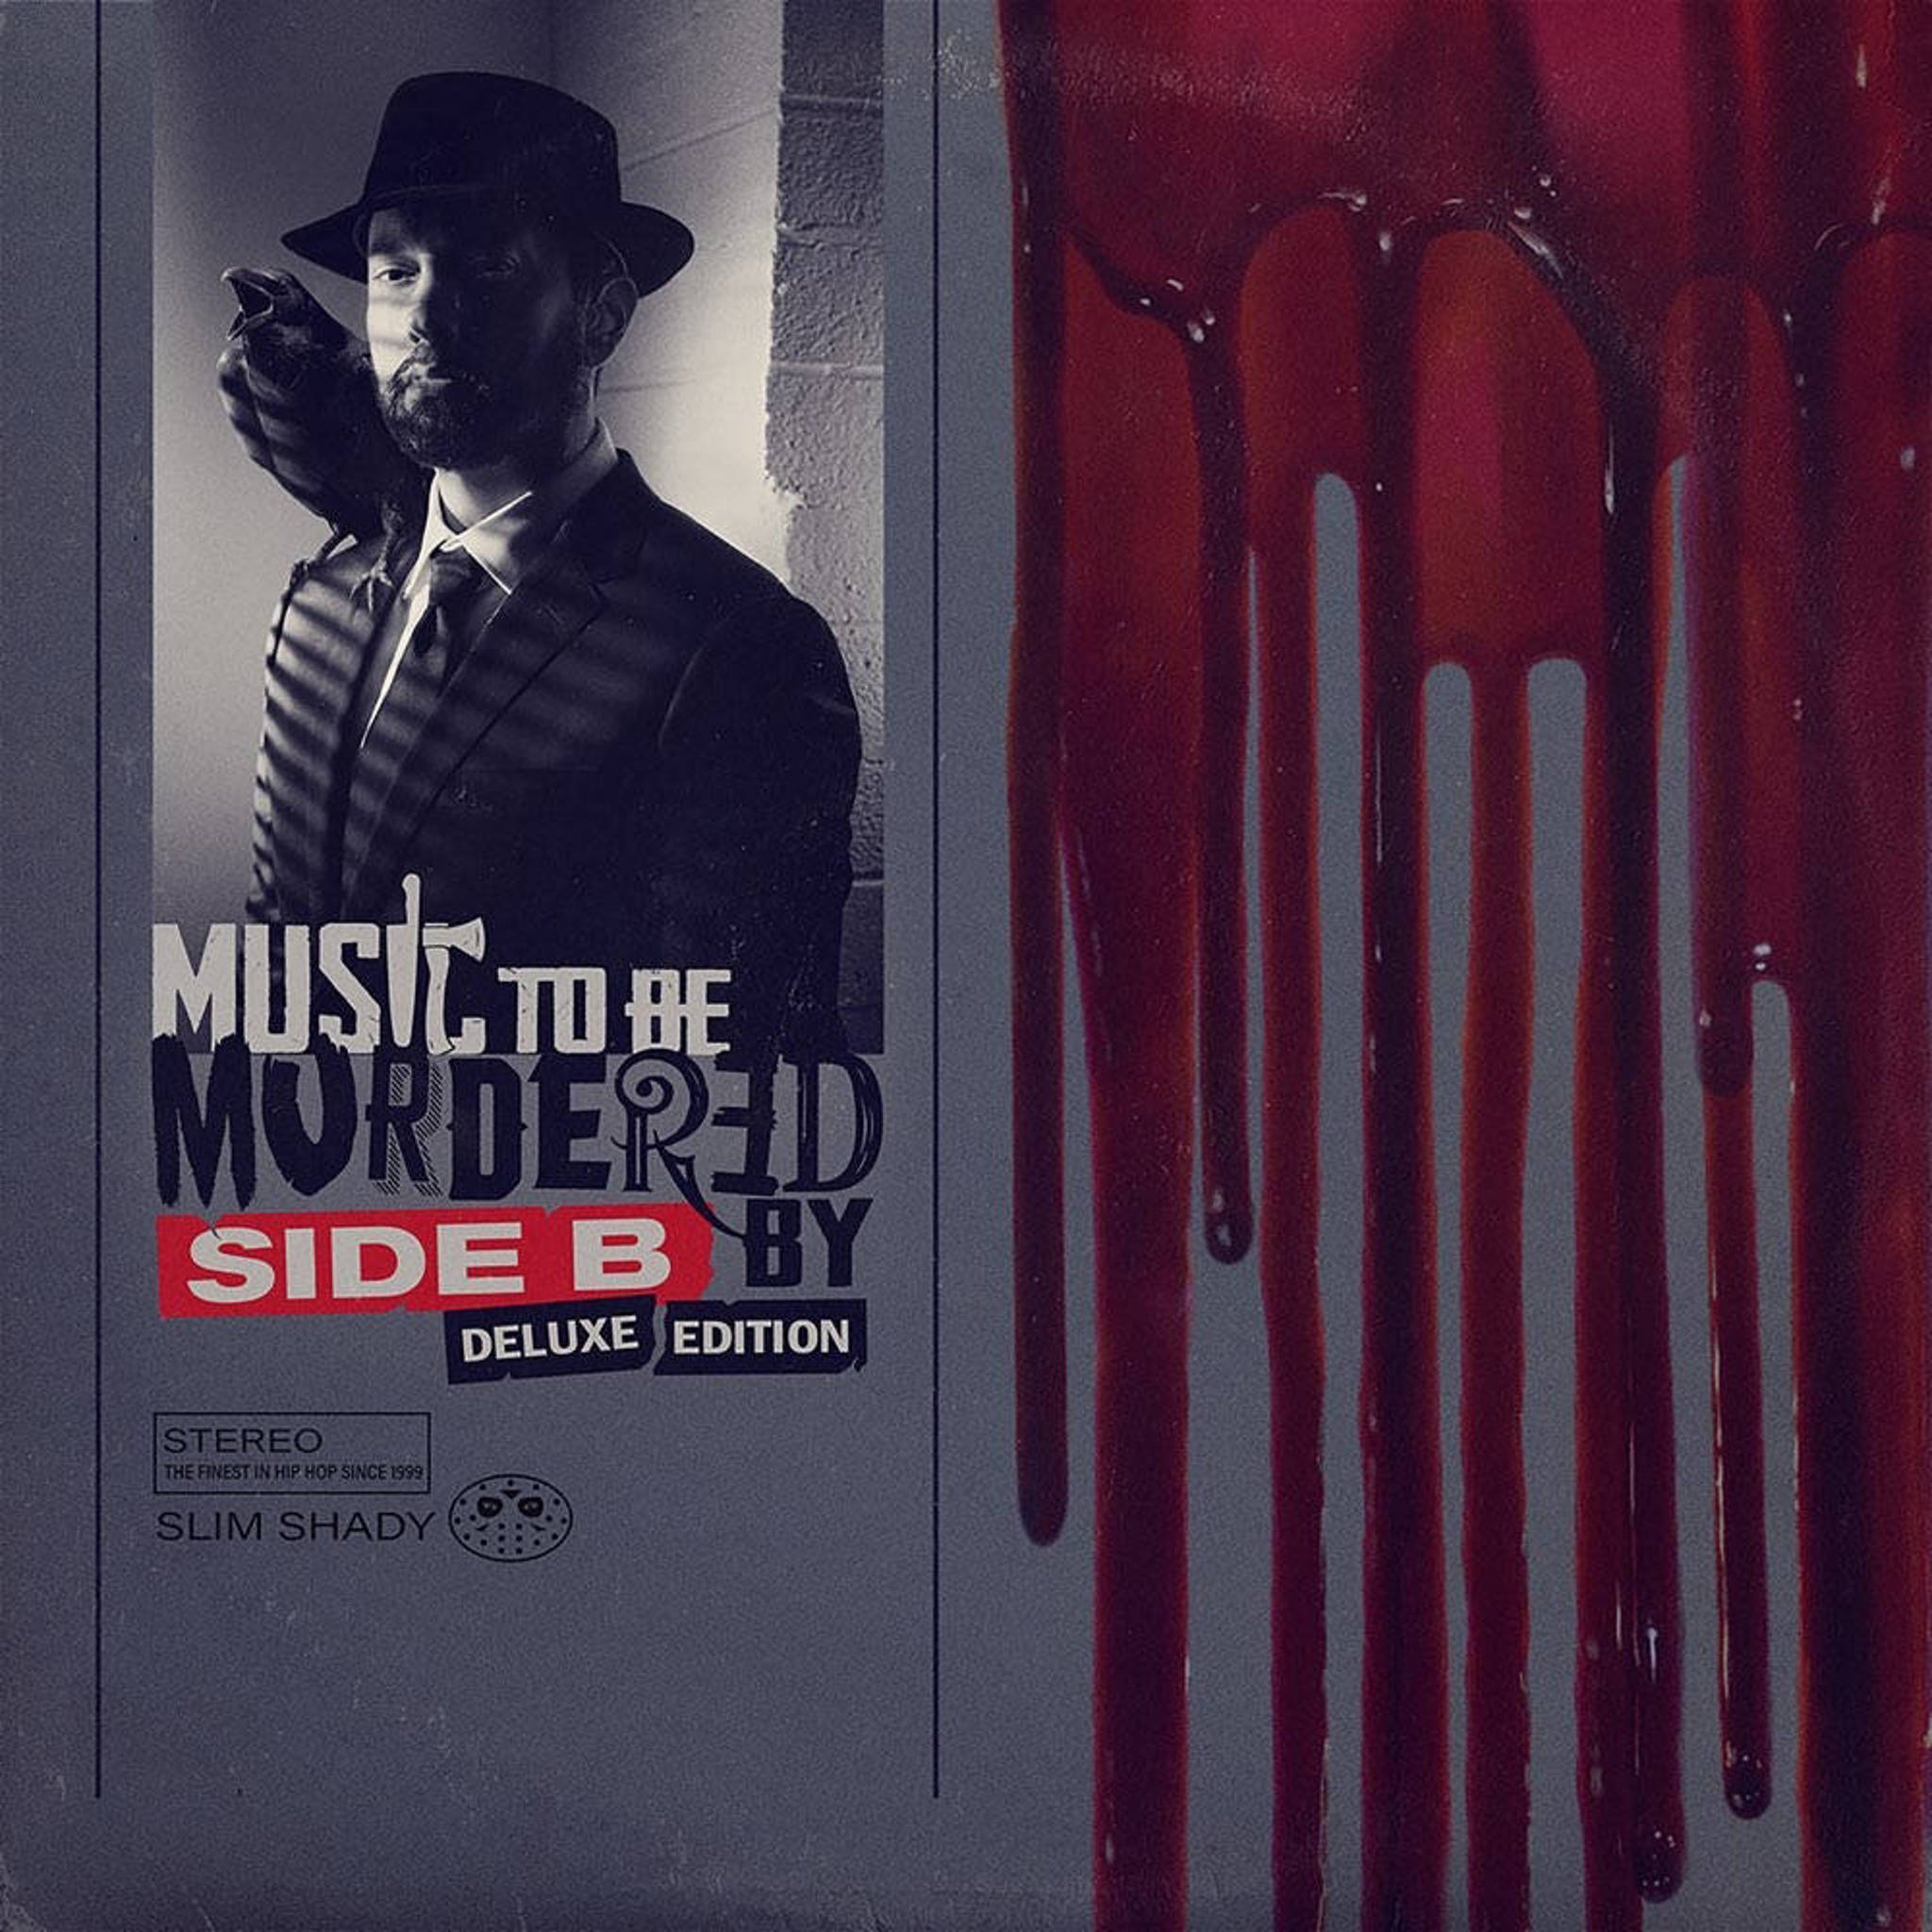 Eminem-Music To Be Murdered By-Side B (Deluxe Edition)-16BIT-WEBFLAC-2020-MenInFlac